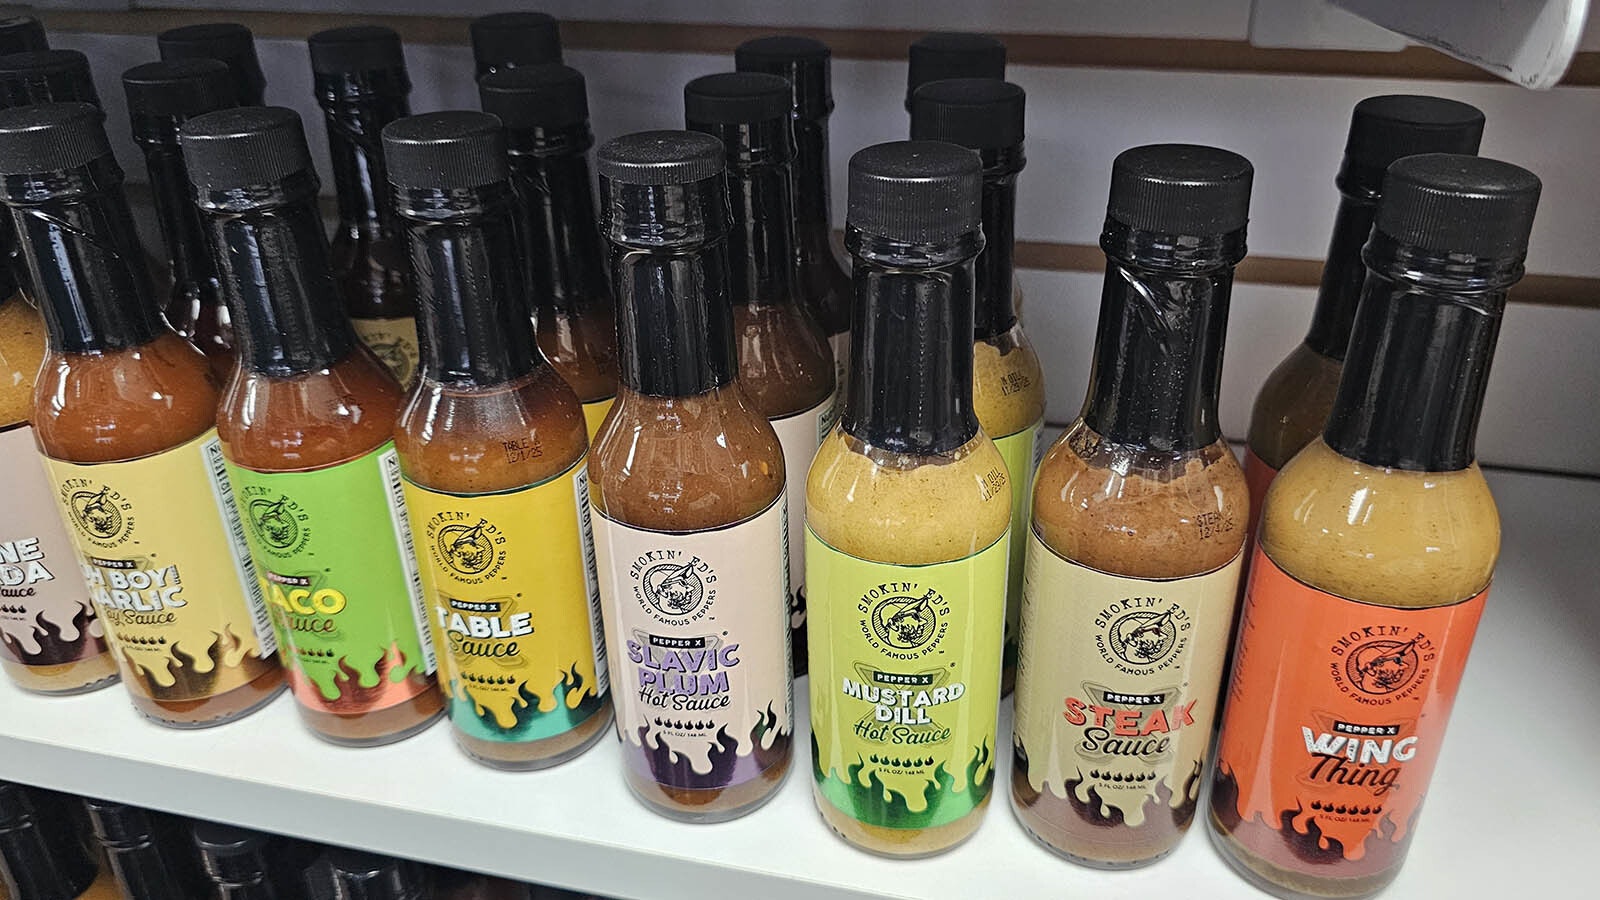 A line of Pepper X sauces — the hottest pepper in the world, according to Guiness World Records.